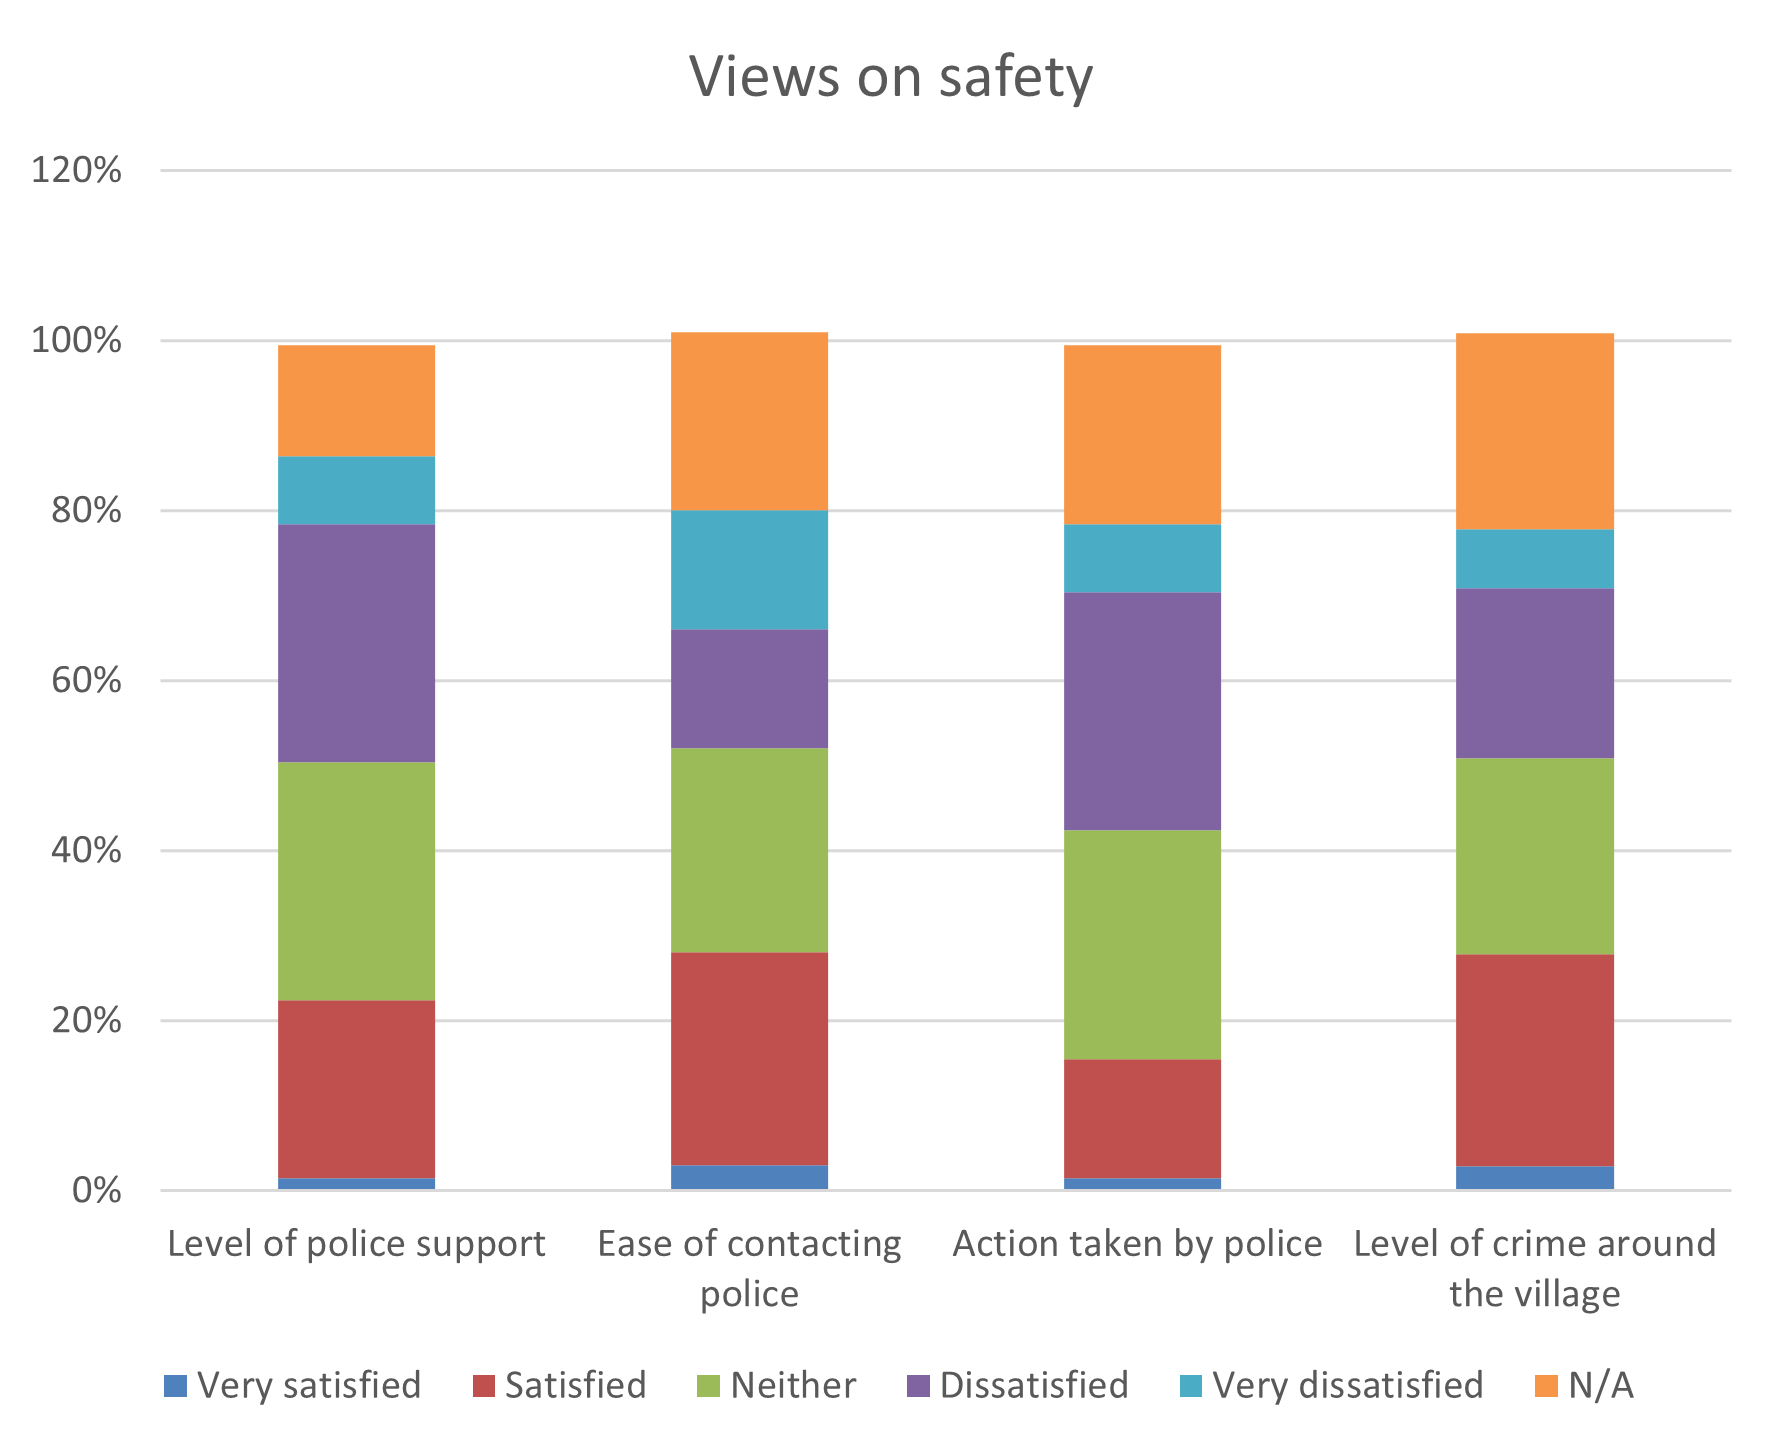 Views on safety bar chart